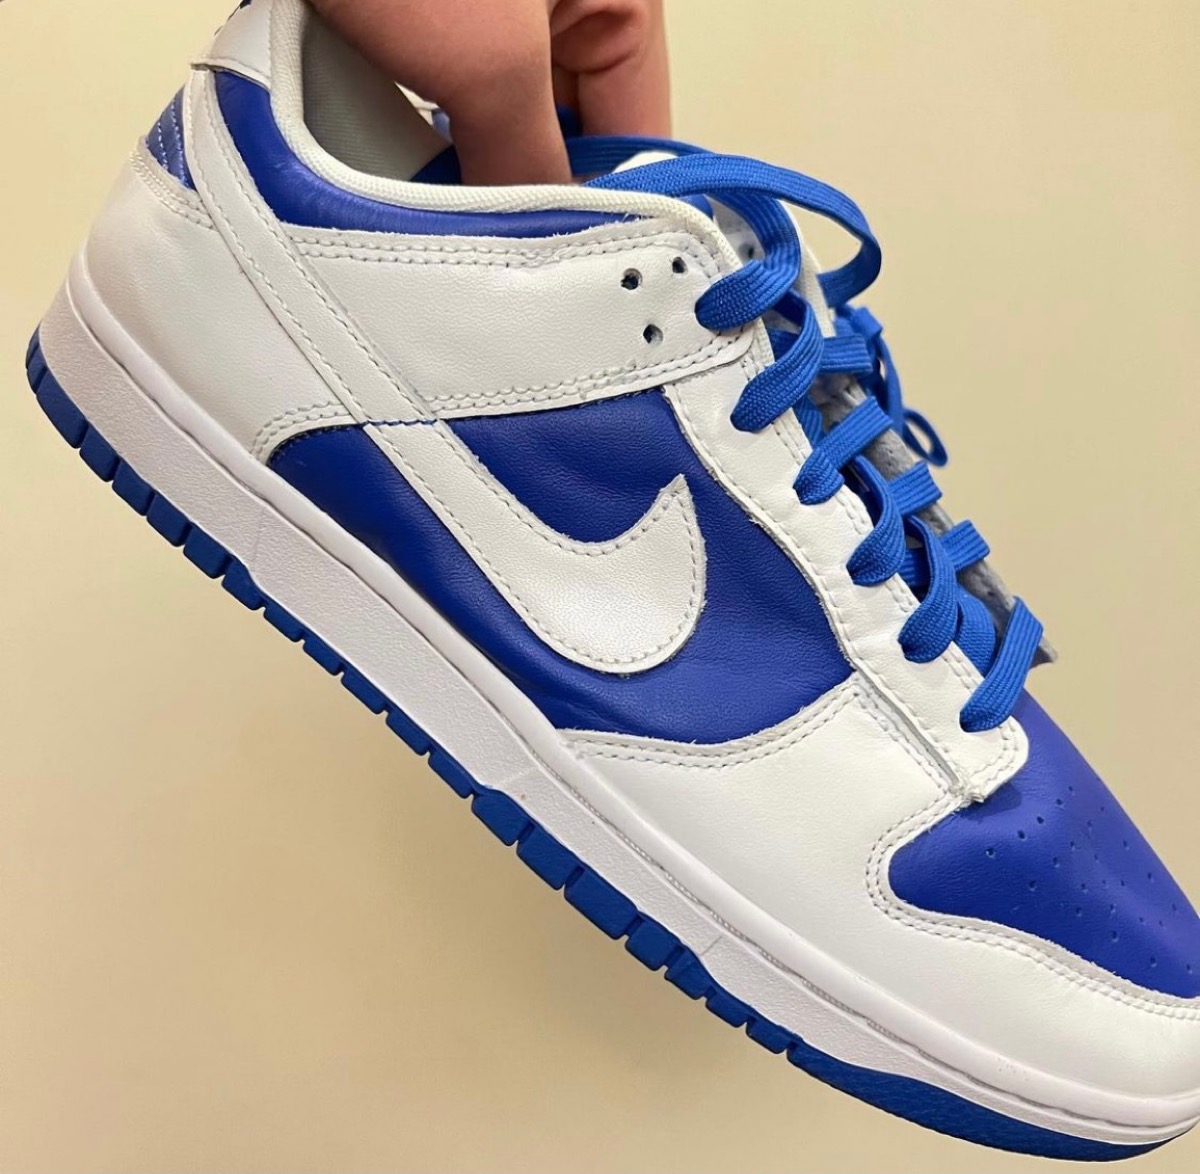 Nike Dunk Low Retro “Racer Blue and White”が国内7月1日に再販予定 | UP TO DATE